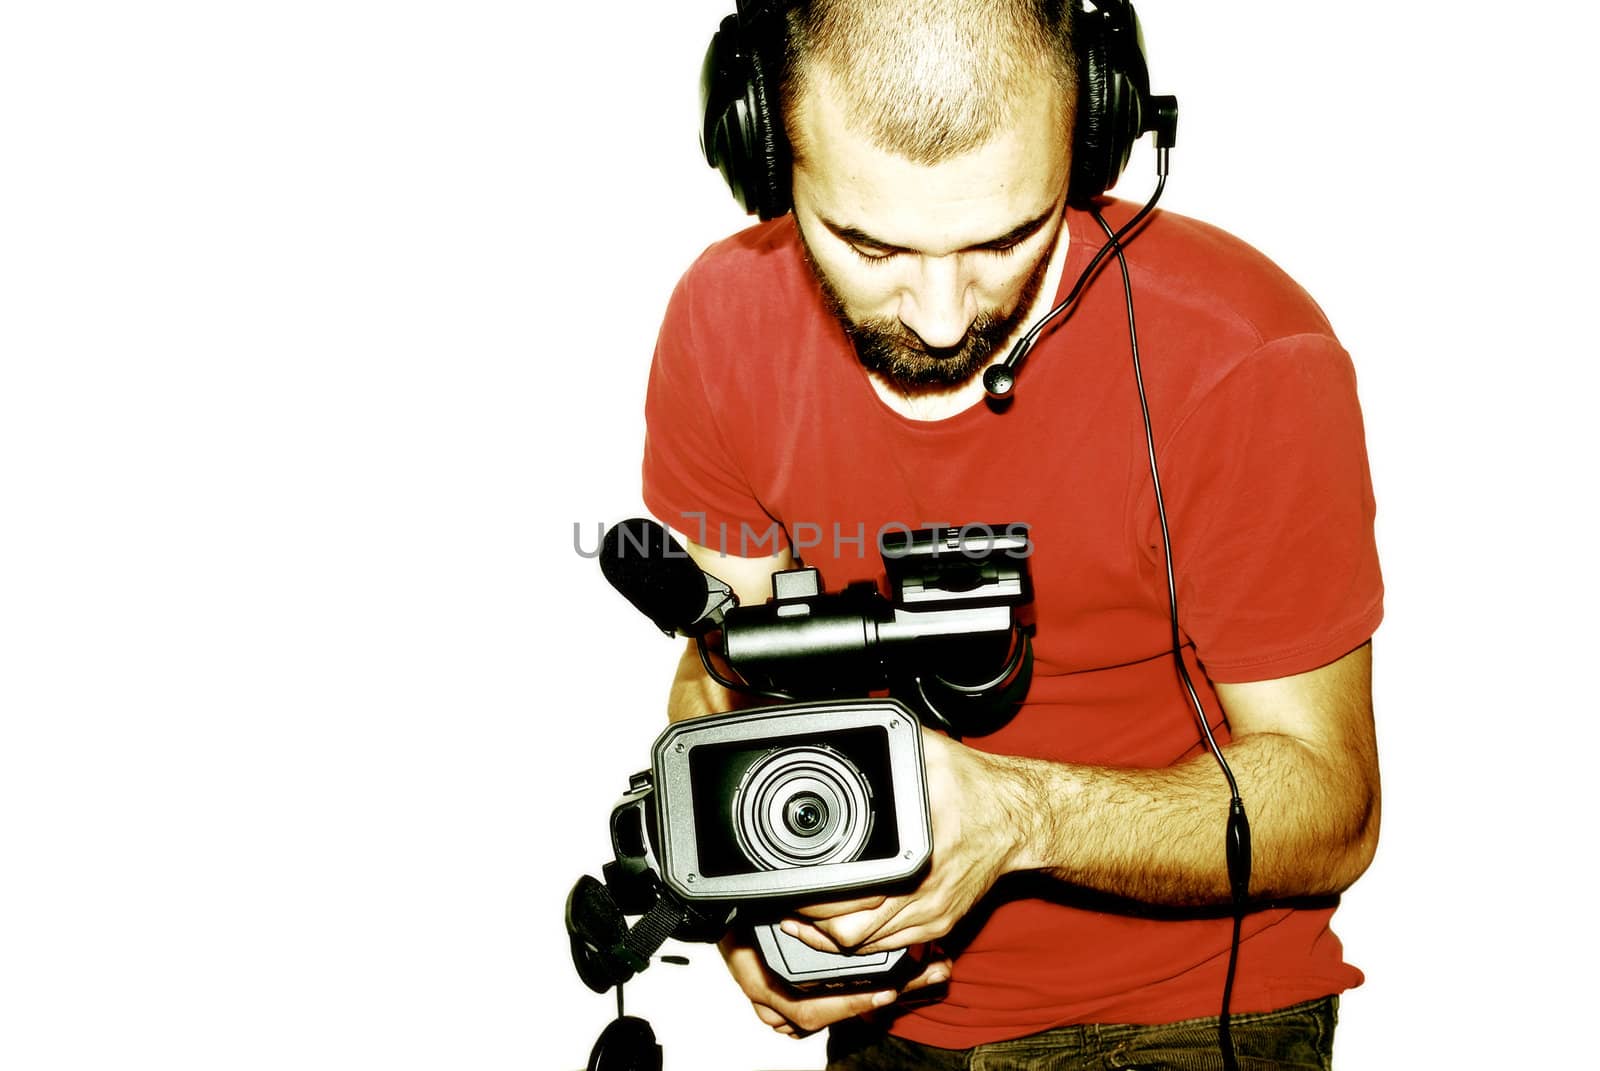 image with a television cameraman working with camera